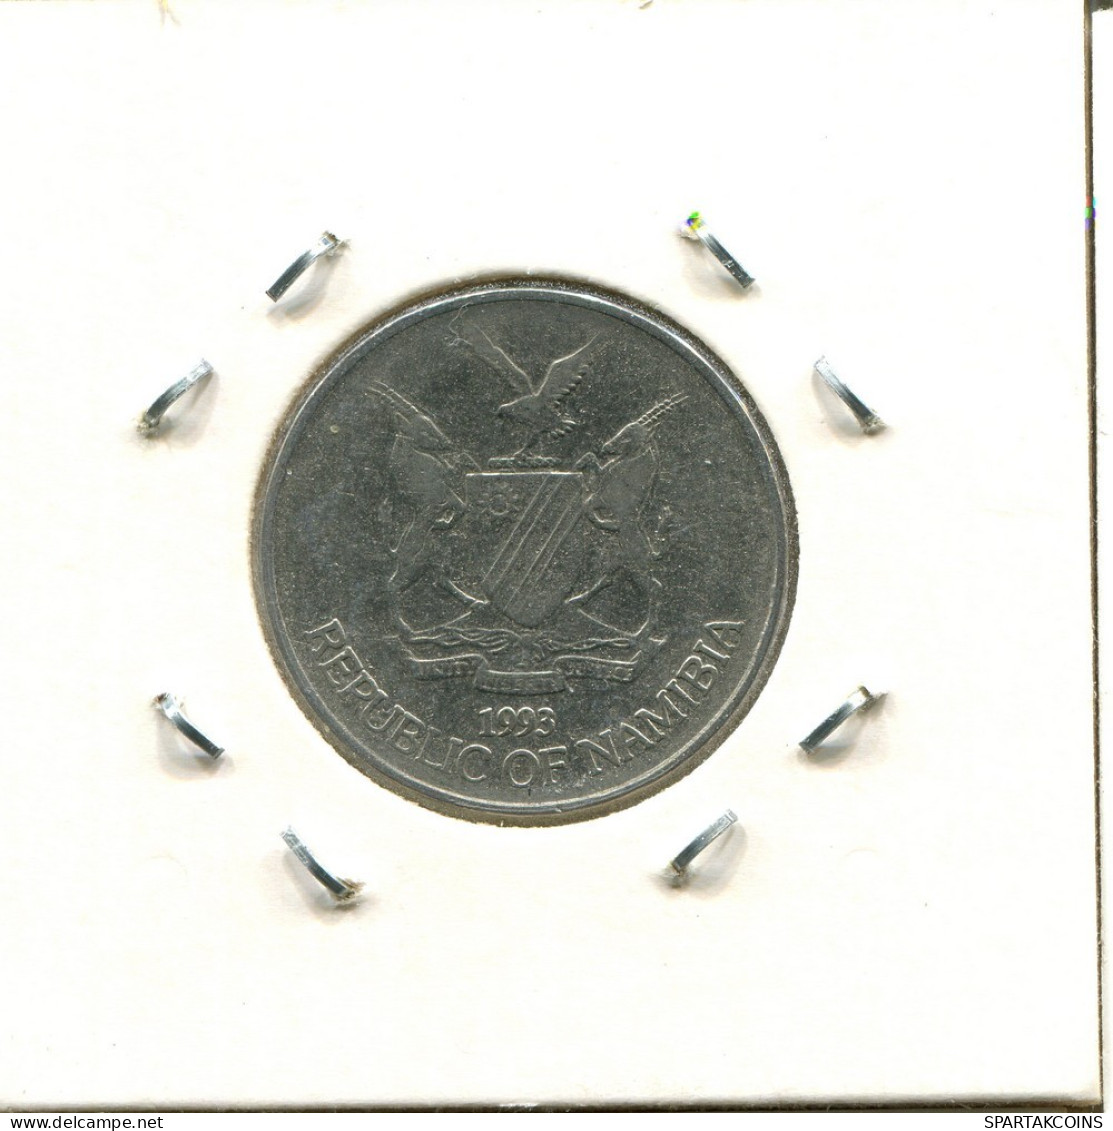 50 CENTS 1993 NAMIBIA Coin #AS396.U.A - Namibie